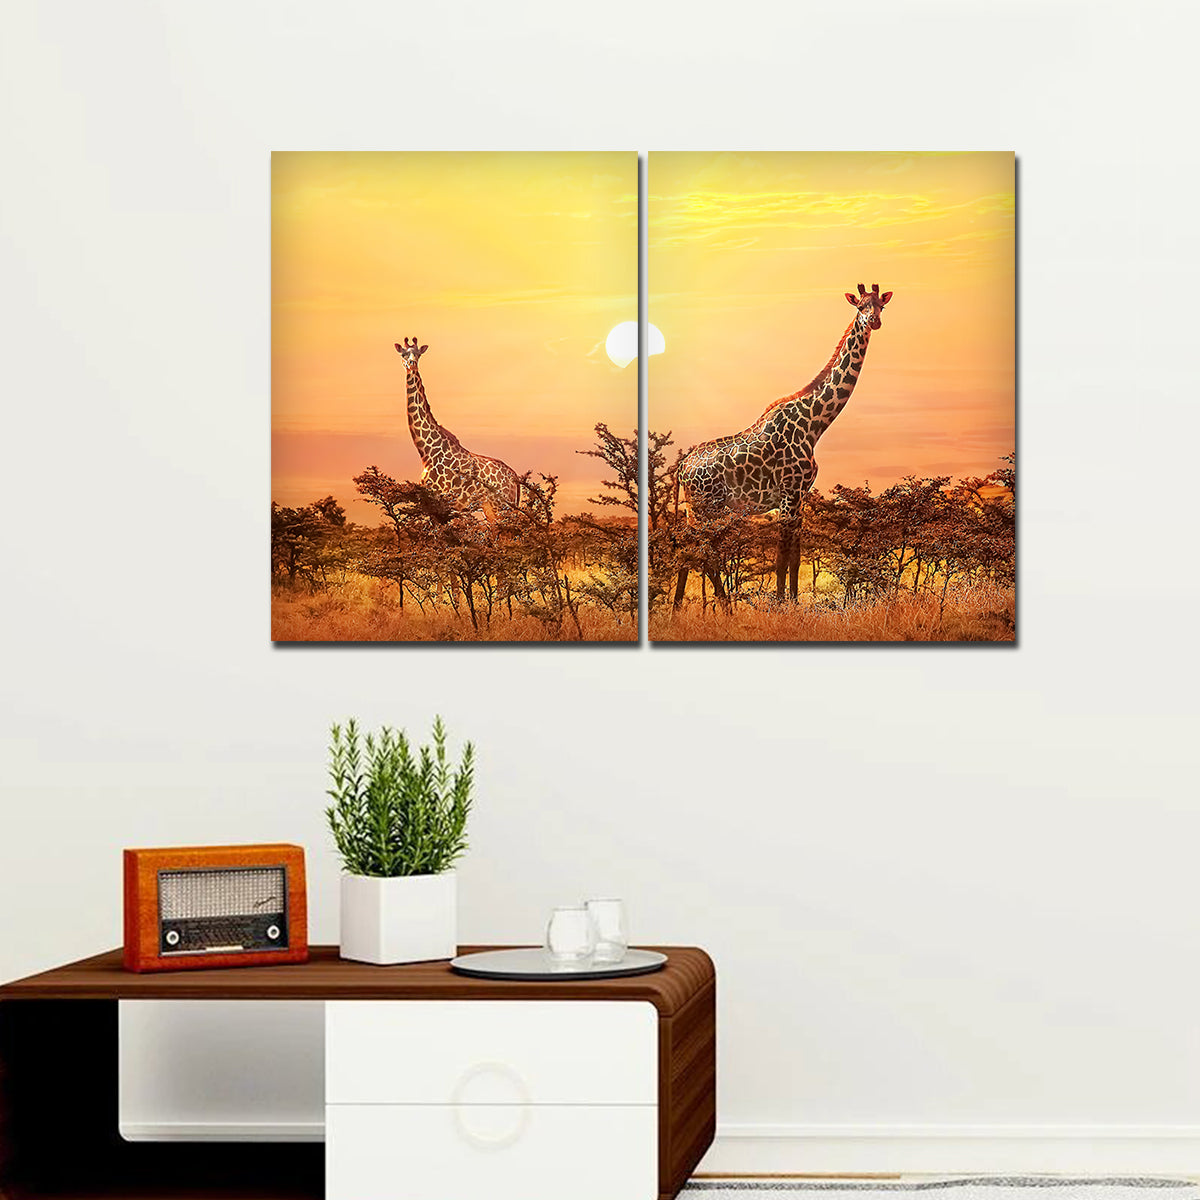  Wall Painting of Giraffes in Sunset